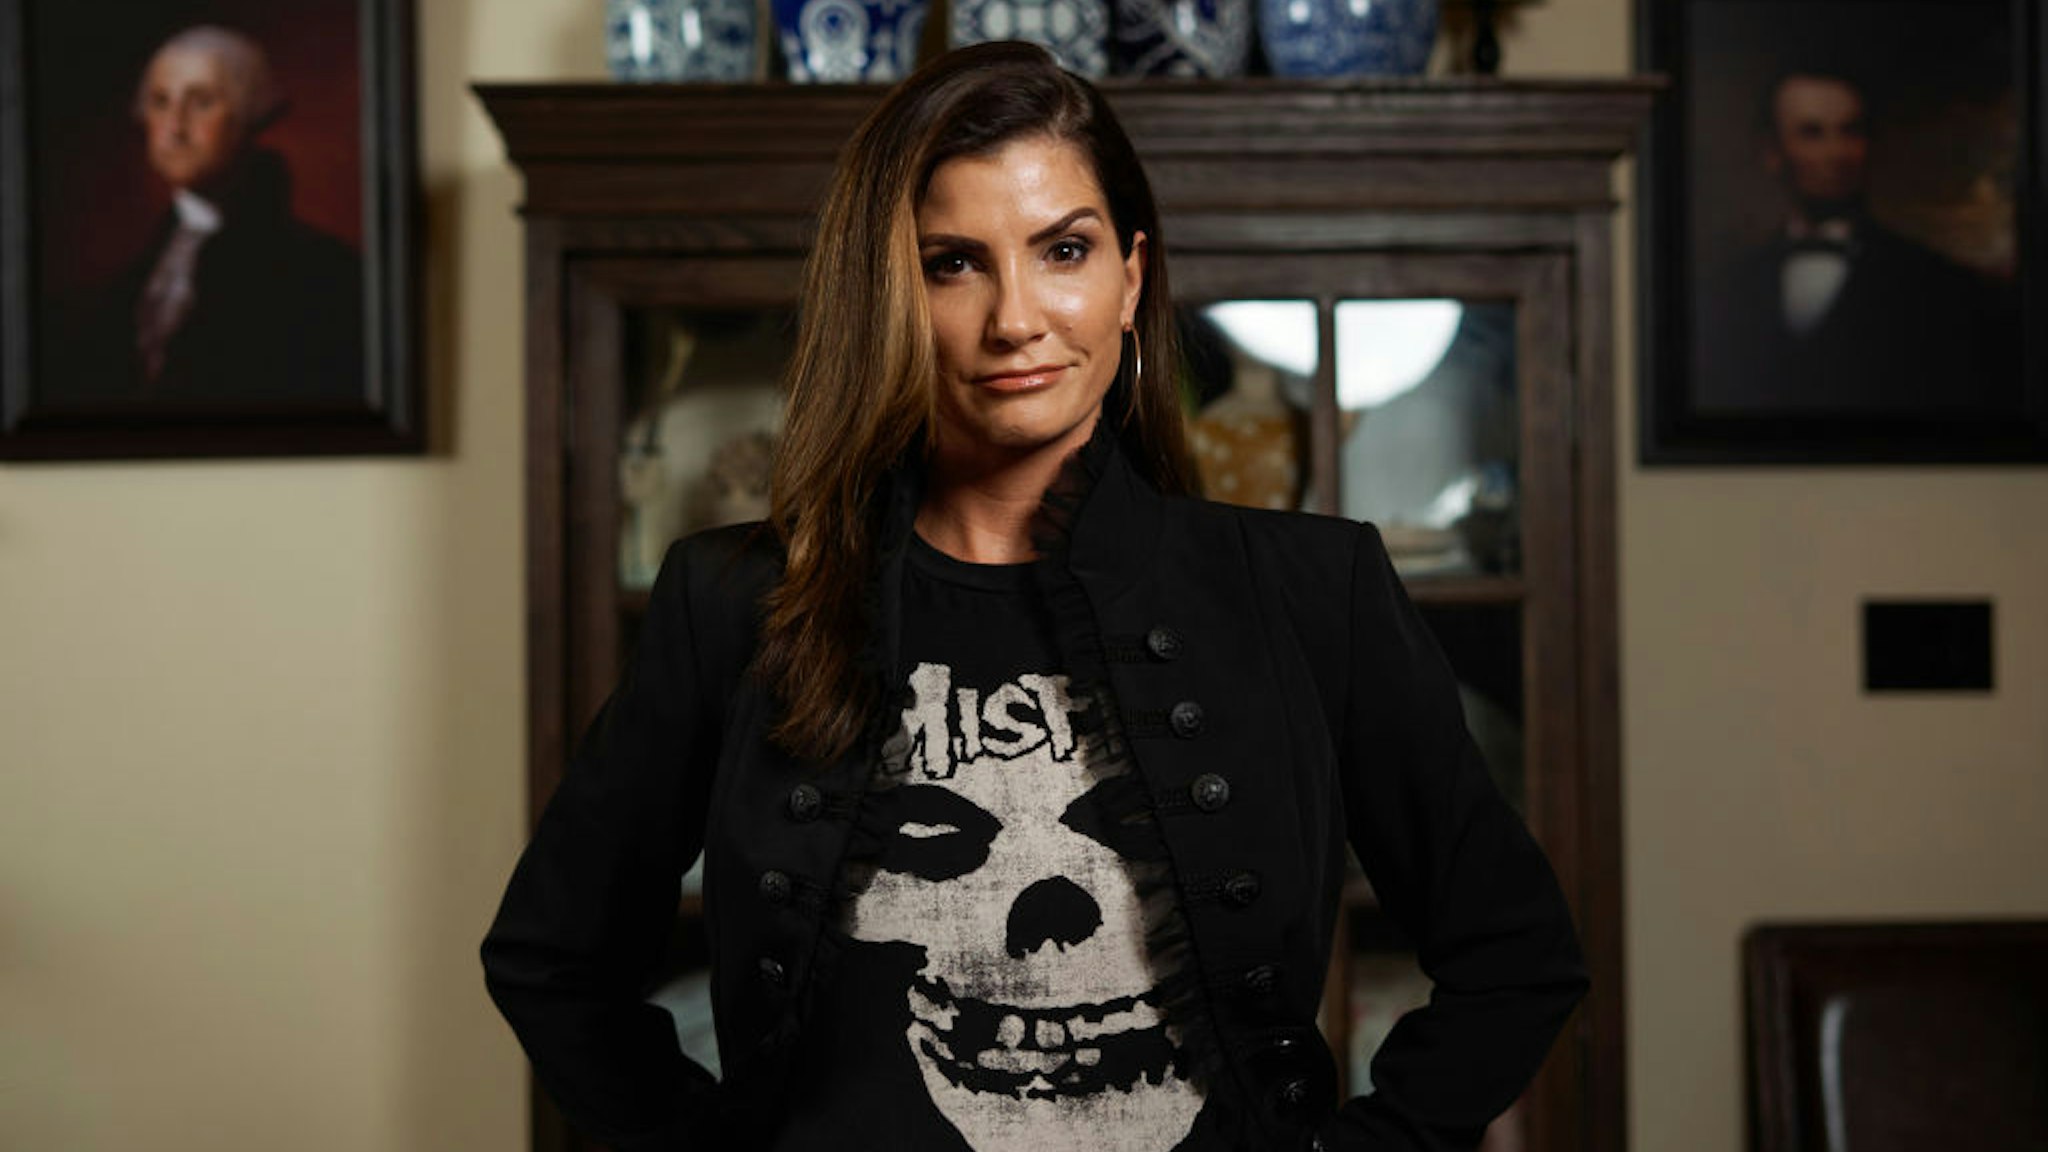 DALLAS, TEXAS - JULY 20: Dana Loesch poses for a portrait at her home outside of Dallas, Texas on July 20, 2021. (Photo by Cooper Neill for The Washington Post via Getty Images)